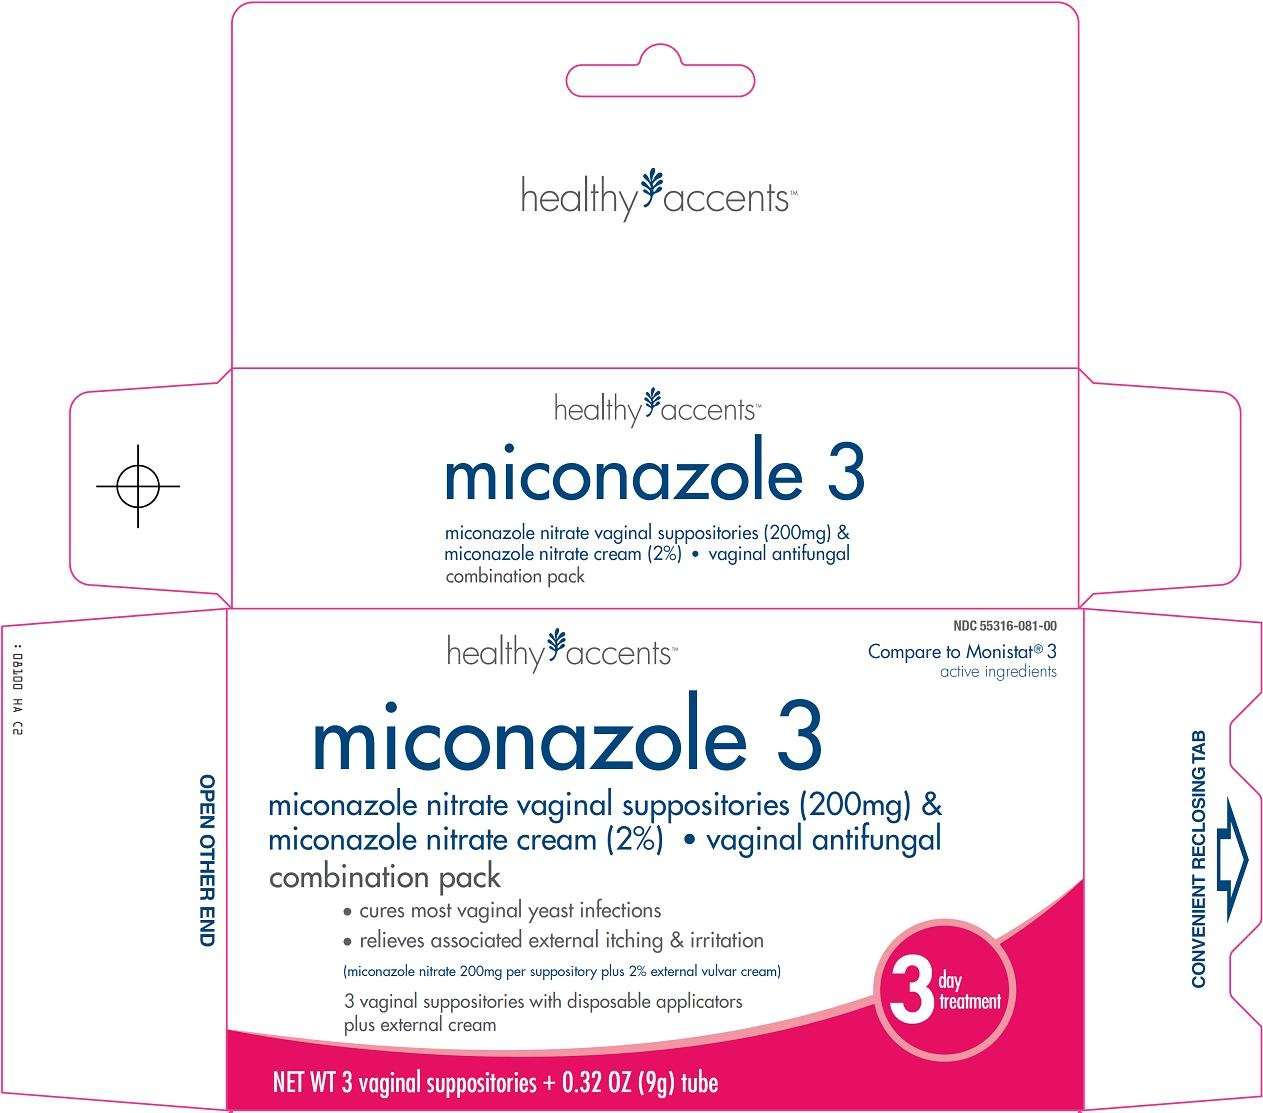 healthy accents miconazole 3